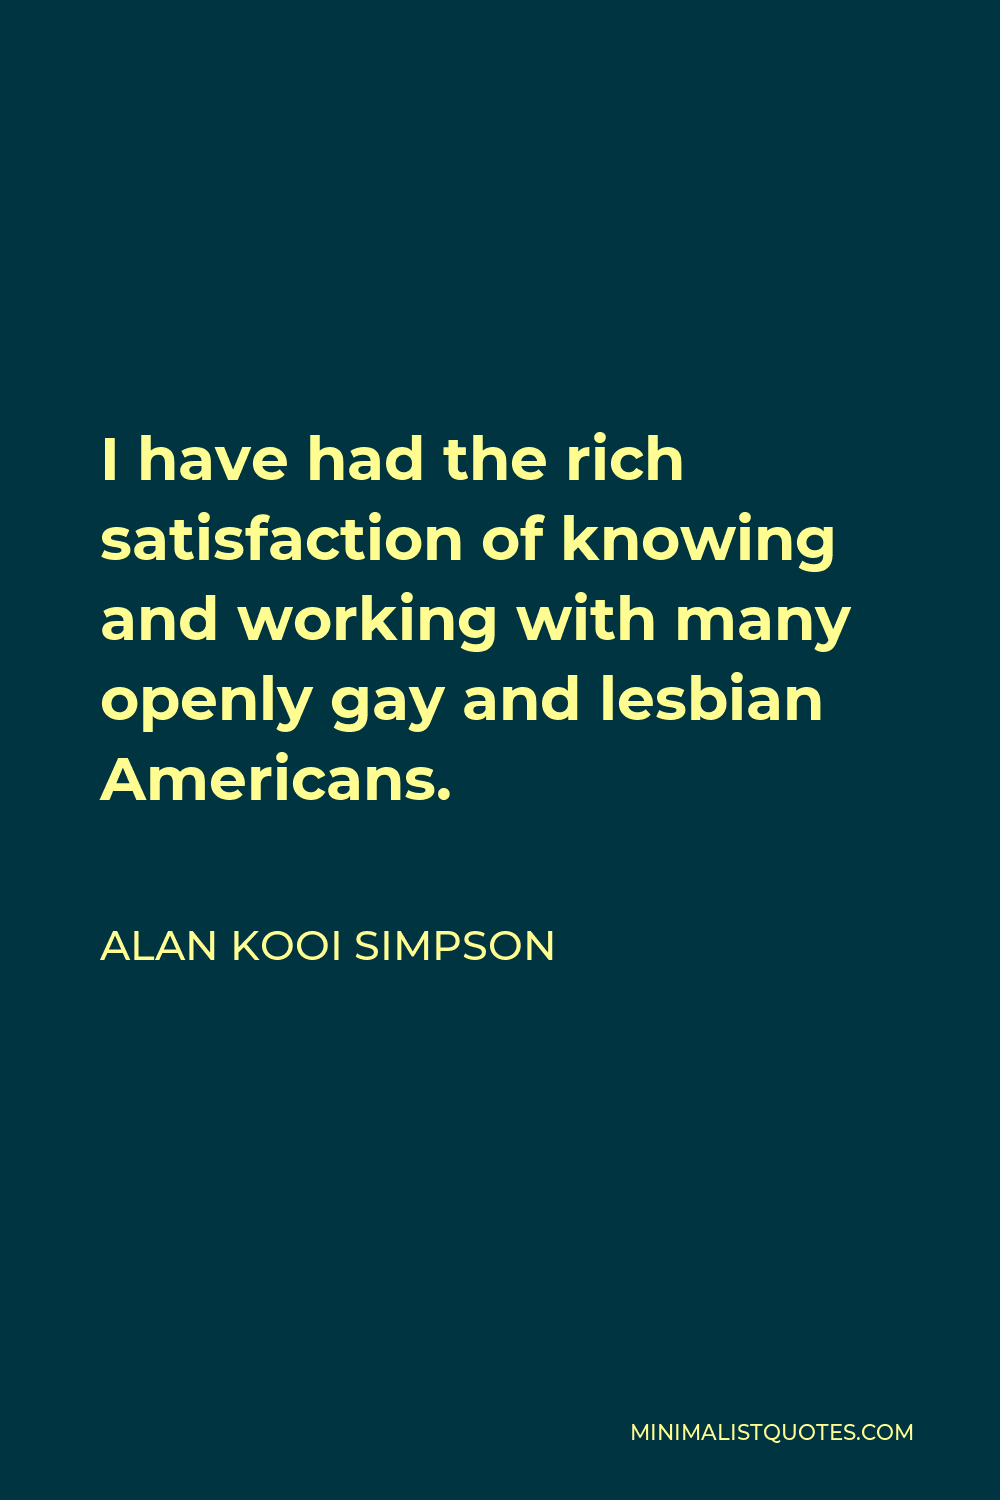 Alan Kooi Simpson Quote - I have had the rich satisfaction of knowing and working with many openly gay and lesbian Americans.